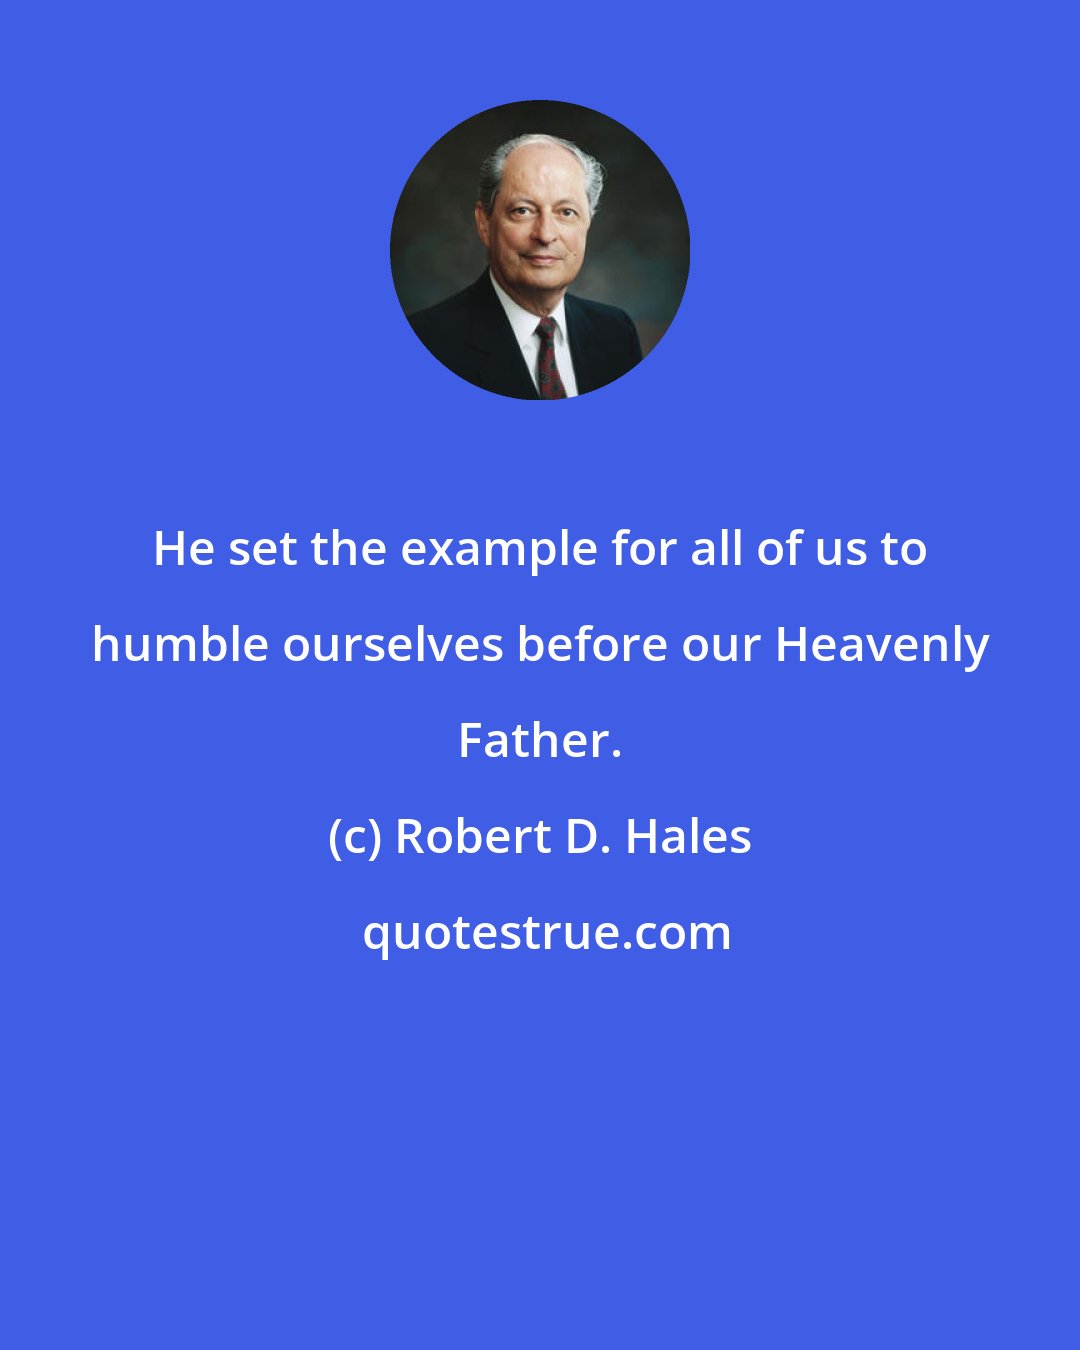 Robert D. Hales: He set the example for all of us to humble ourselves before our Heavenly Father.